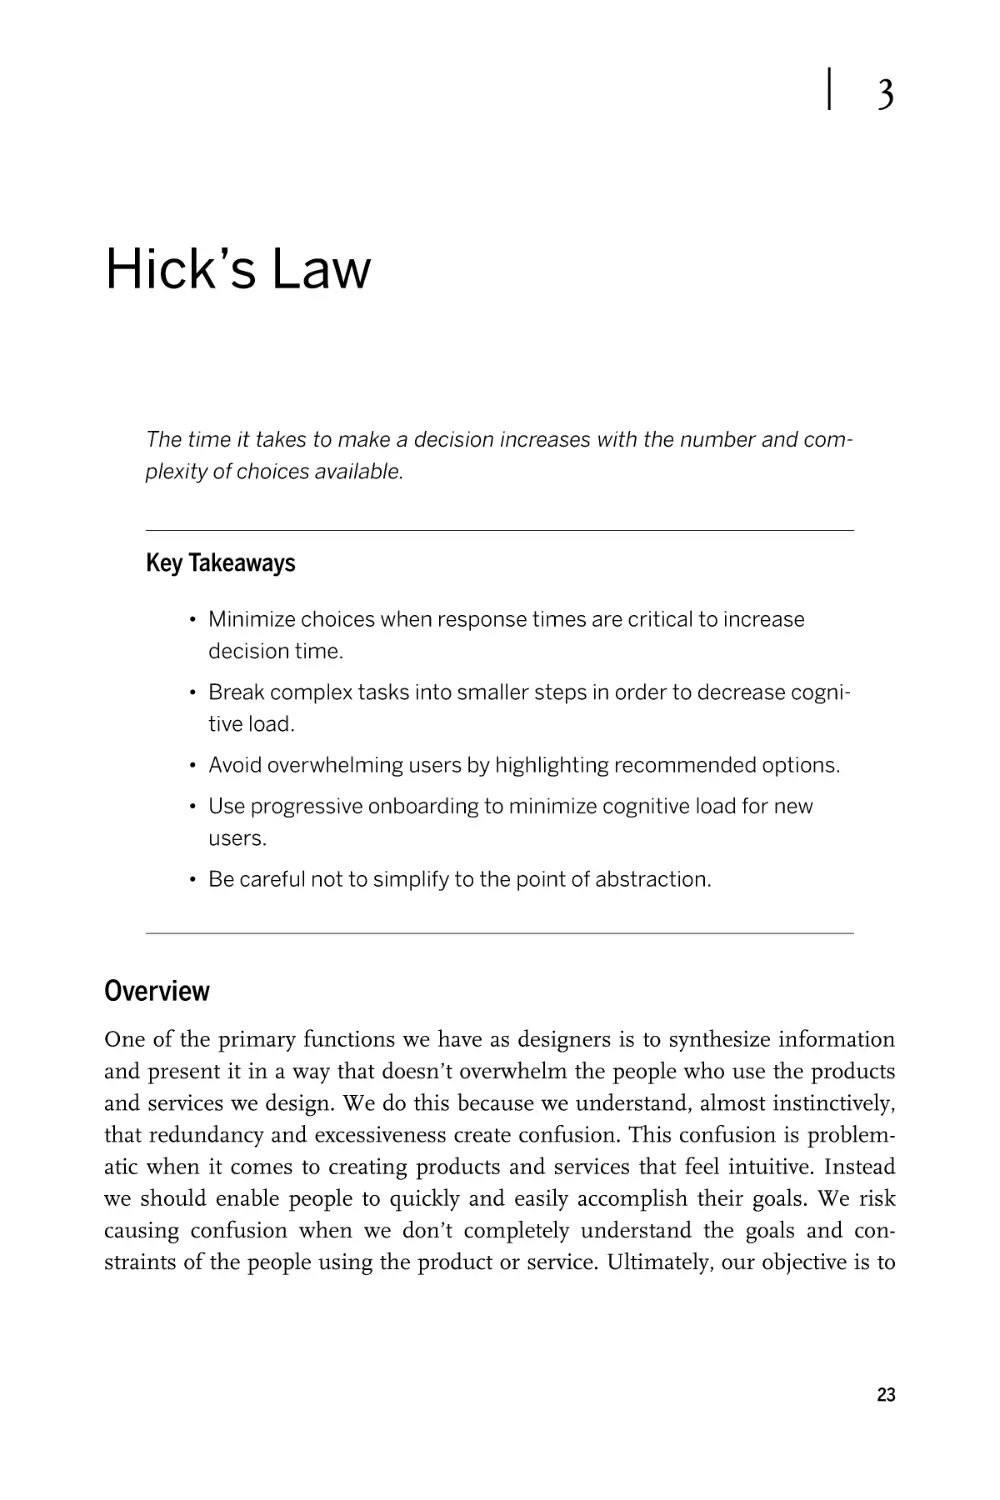 Chapter 3. Hick’s Law
Overview